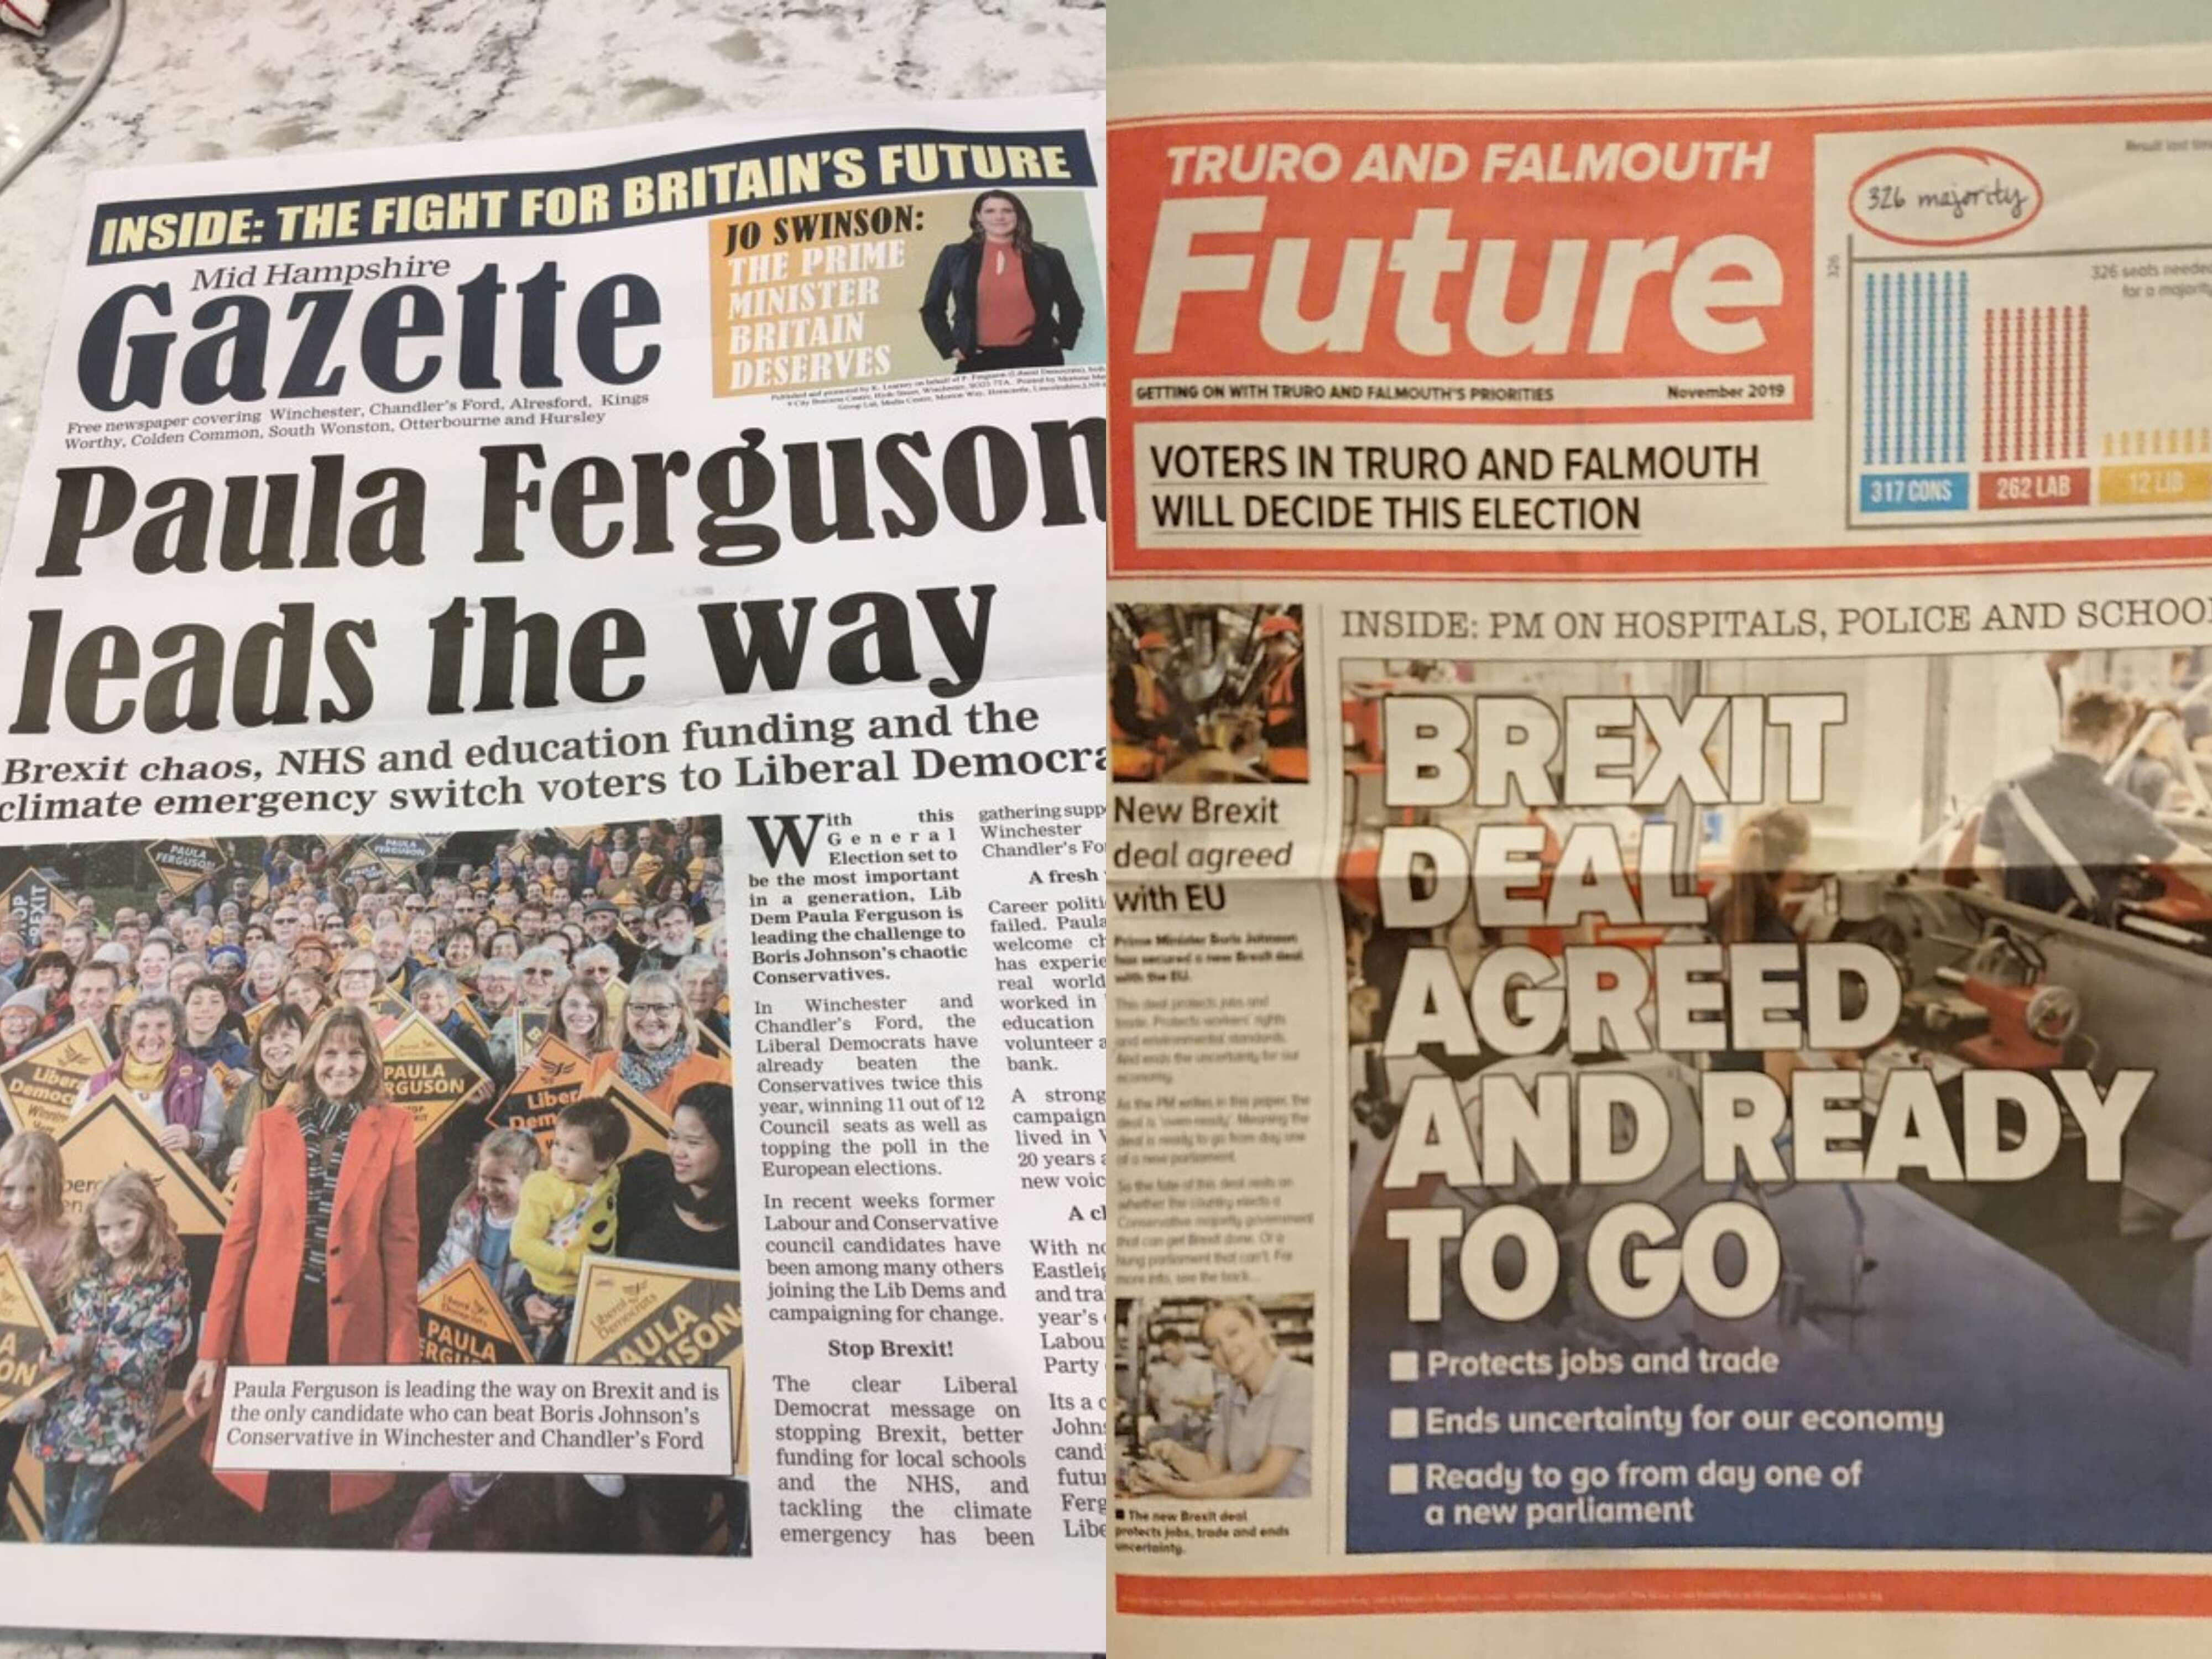 Society of Editors steps up response to political materials imitating trusted local newspapers